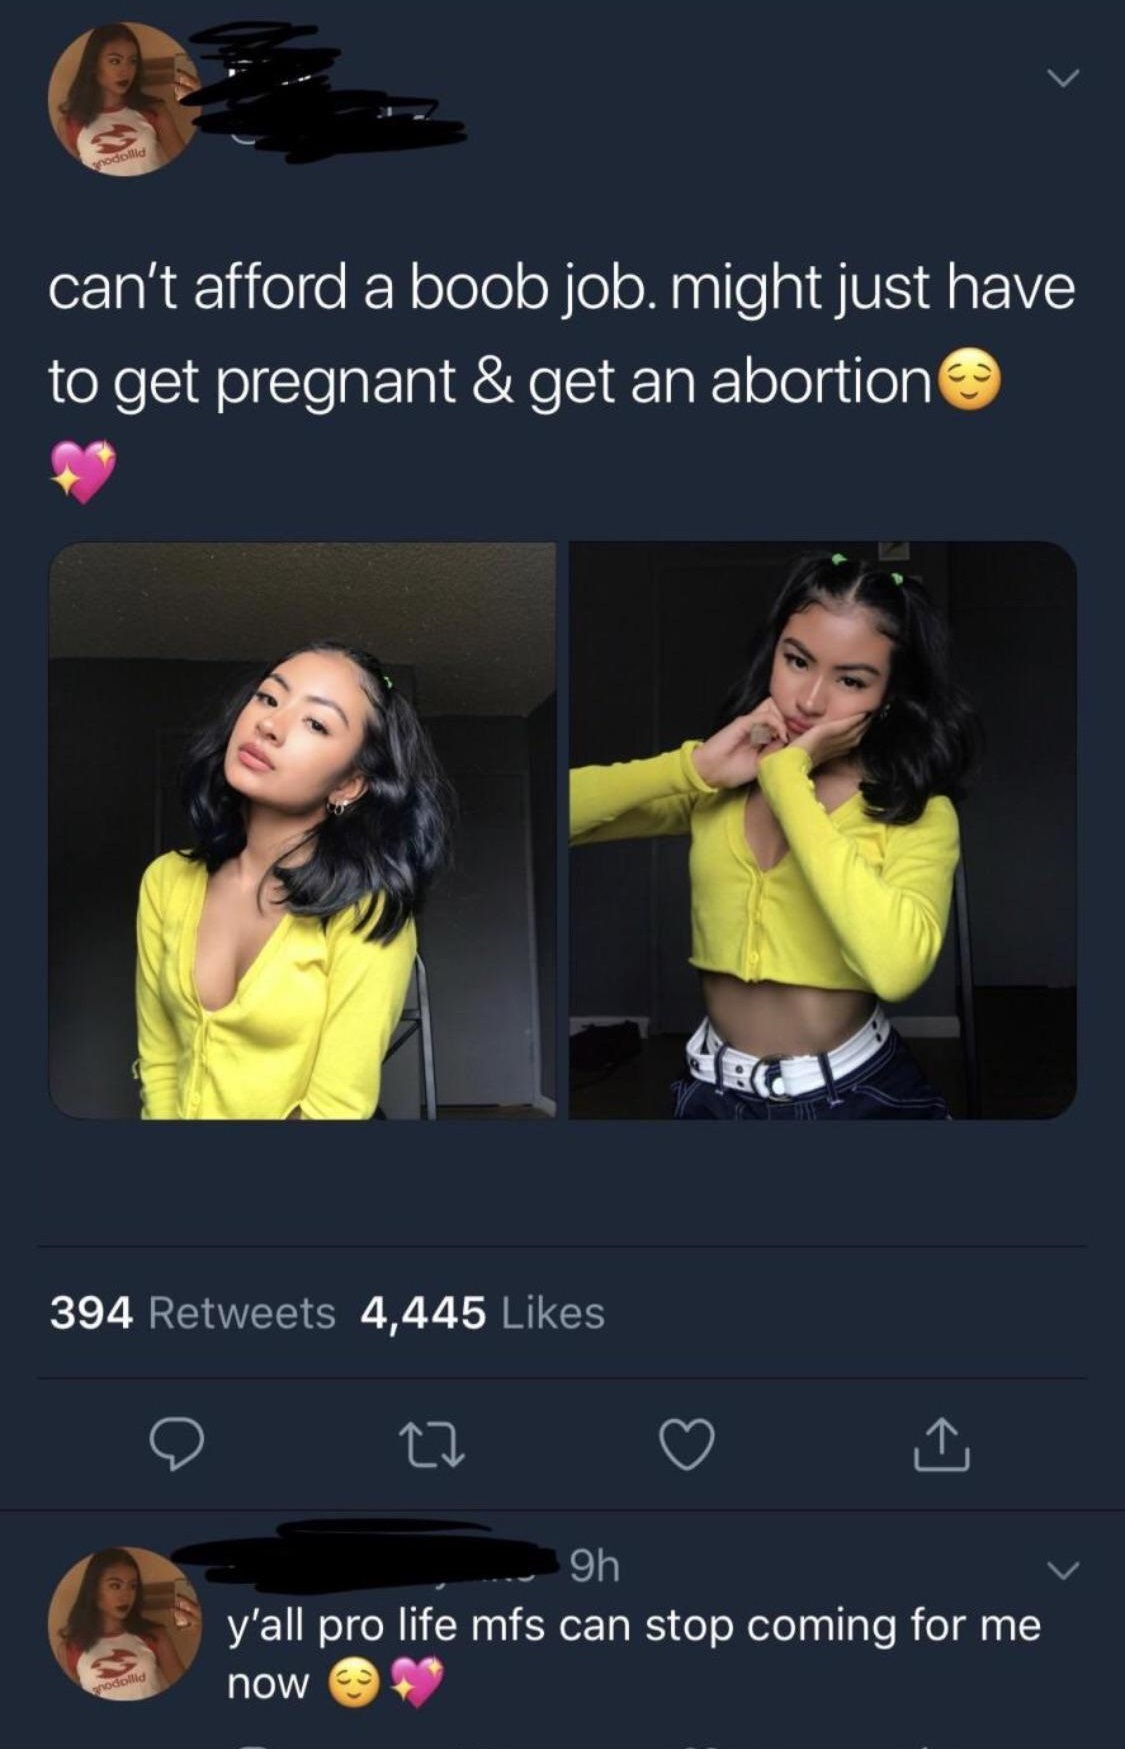 video - nodollid can't afford a boob job. might just have to get pregnant & get an abortion 394 4,445 9h y'all pro life mfs can stop coming for me now